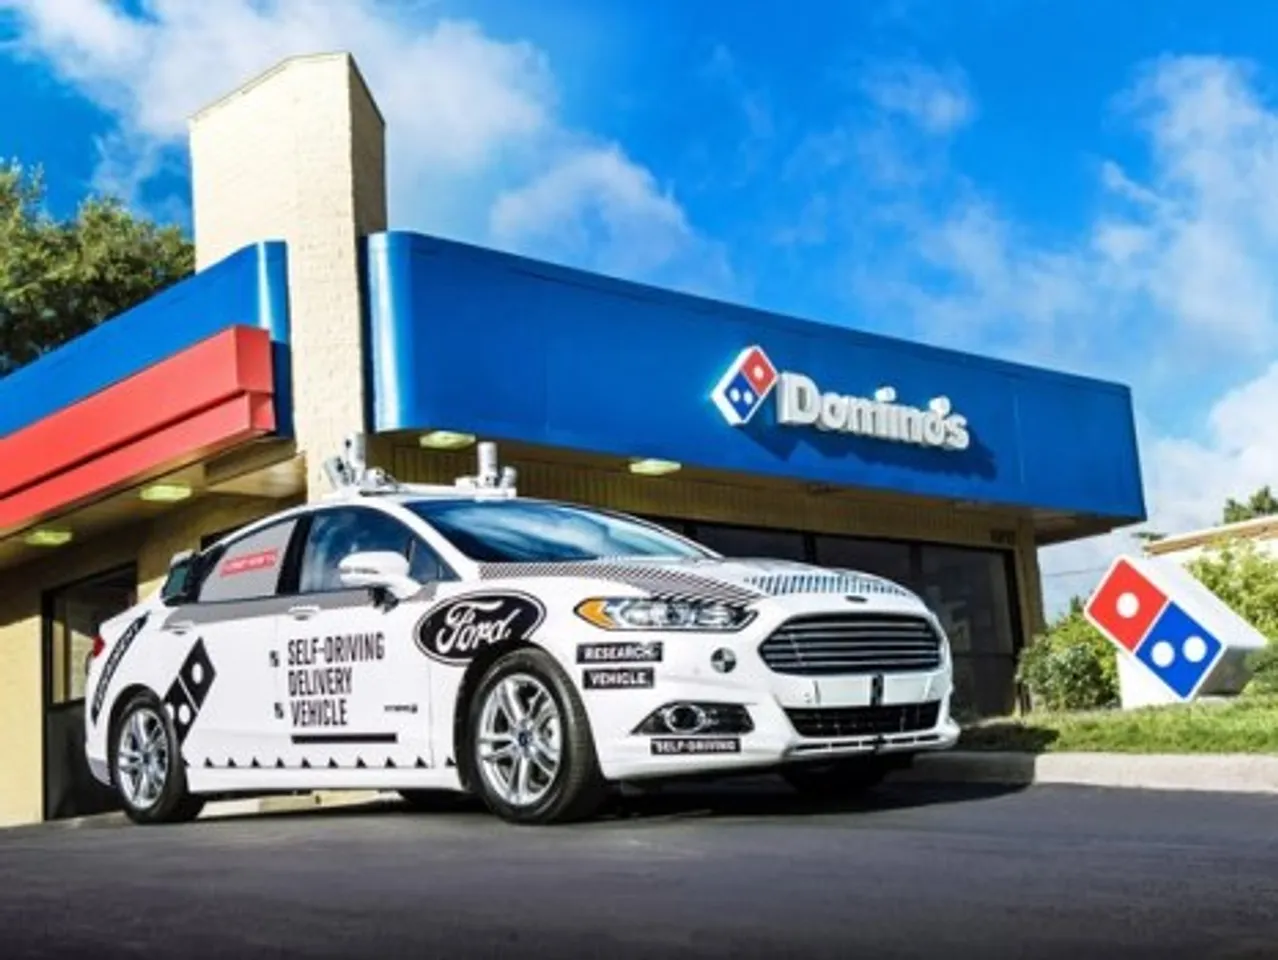 Ford and Domino’s are testing self-driving pizza delivery in Michigan